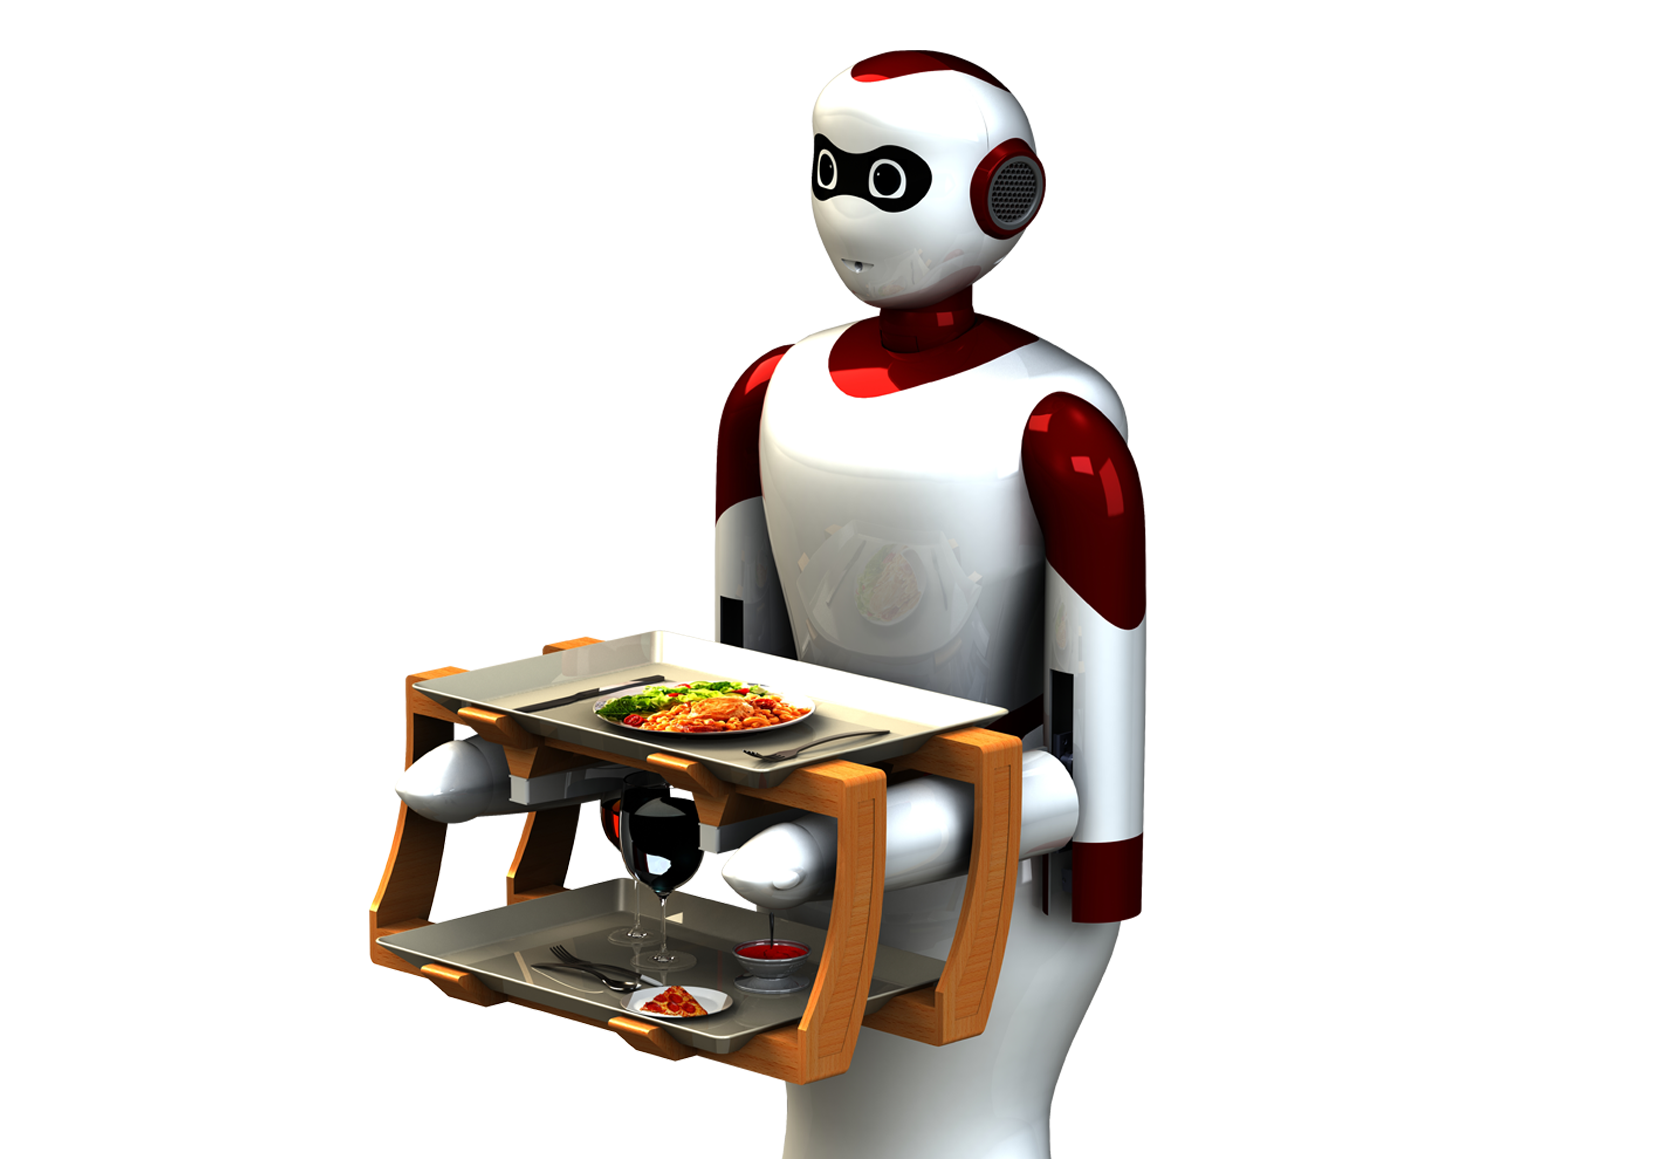 World class waiter robot made in nepal by Paaila Technology.